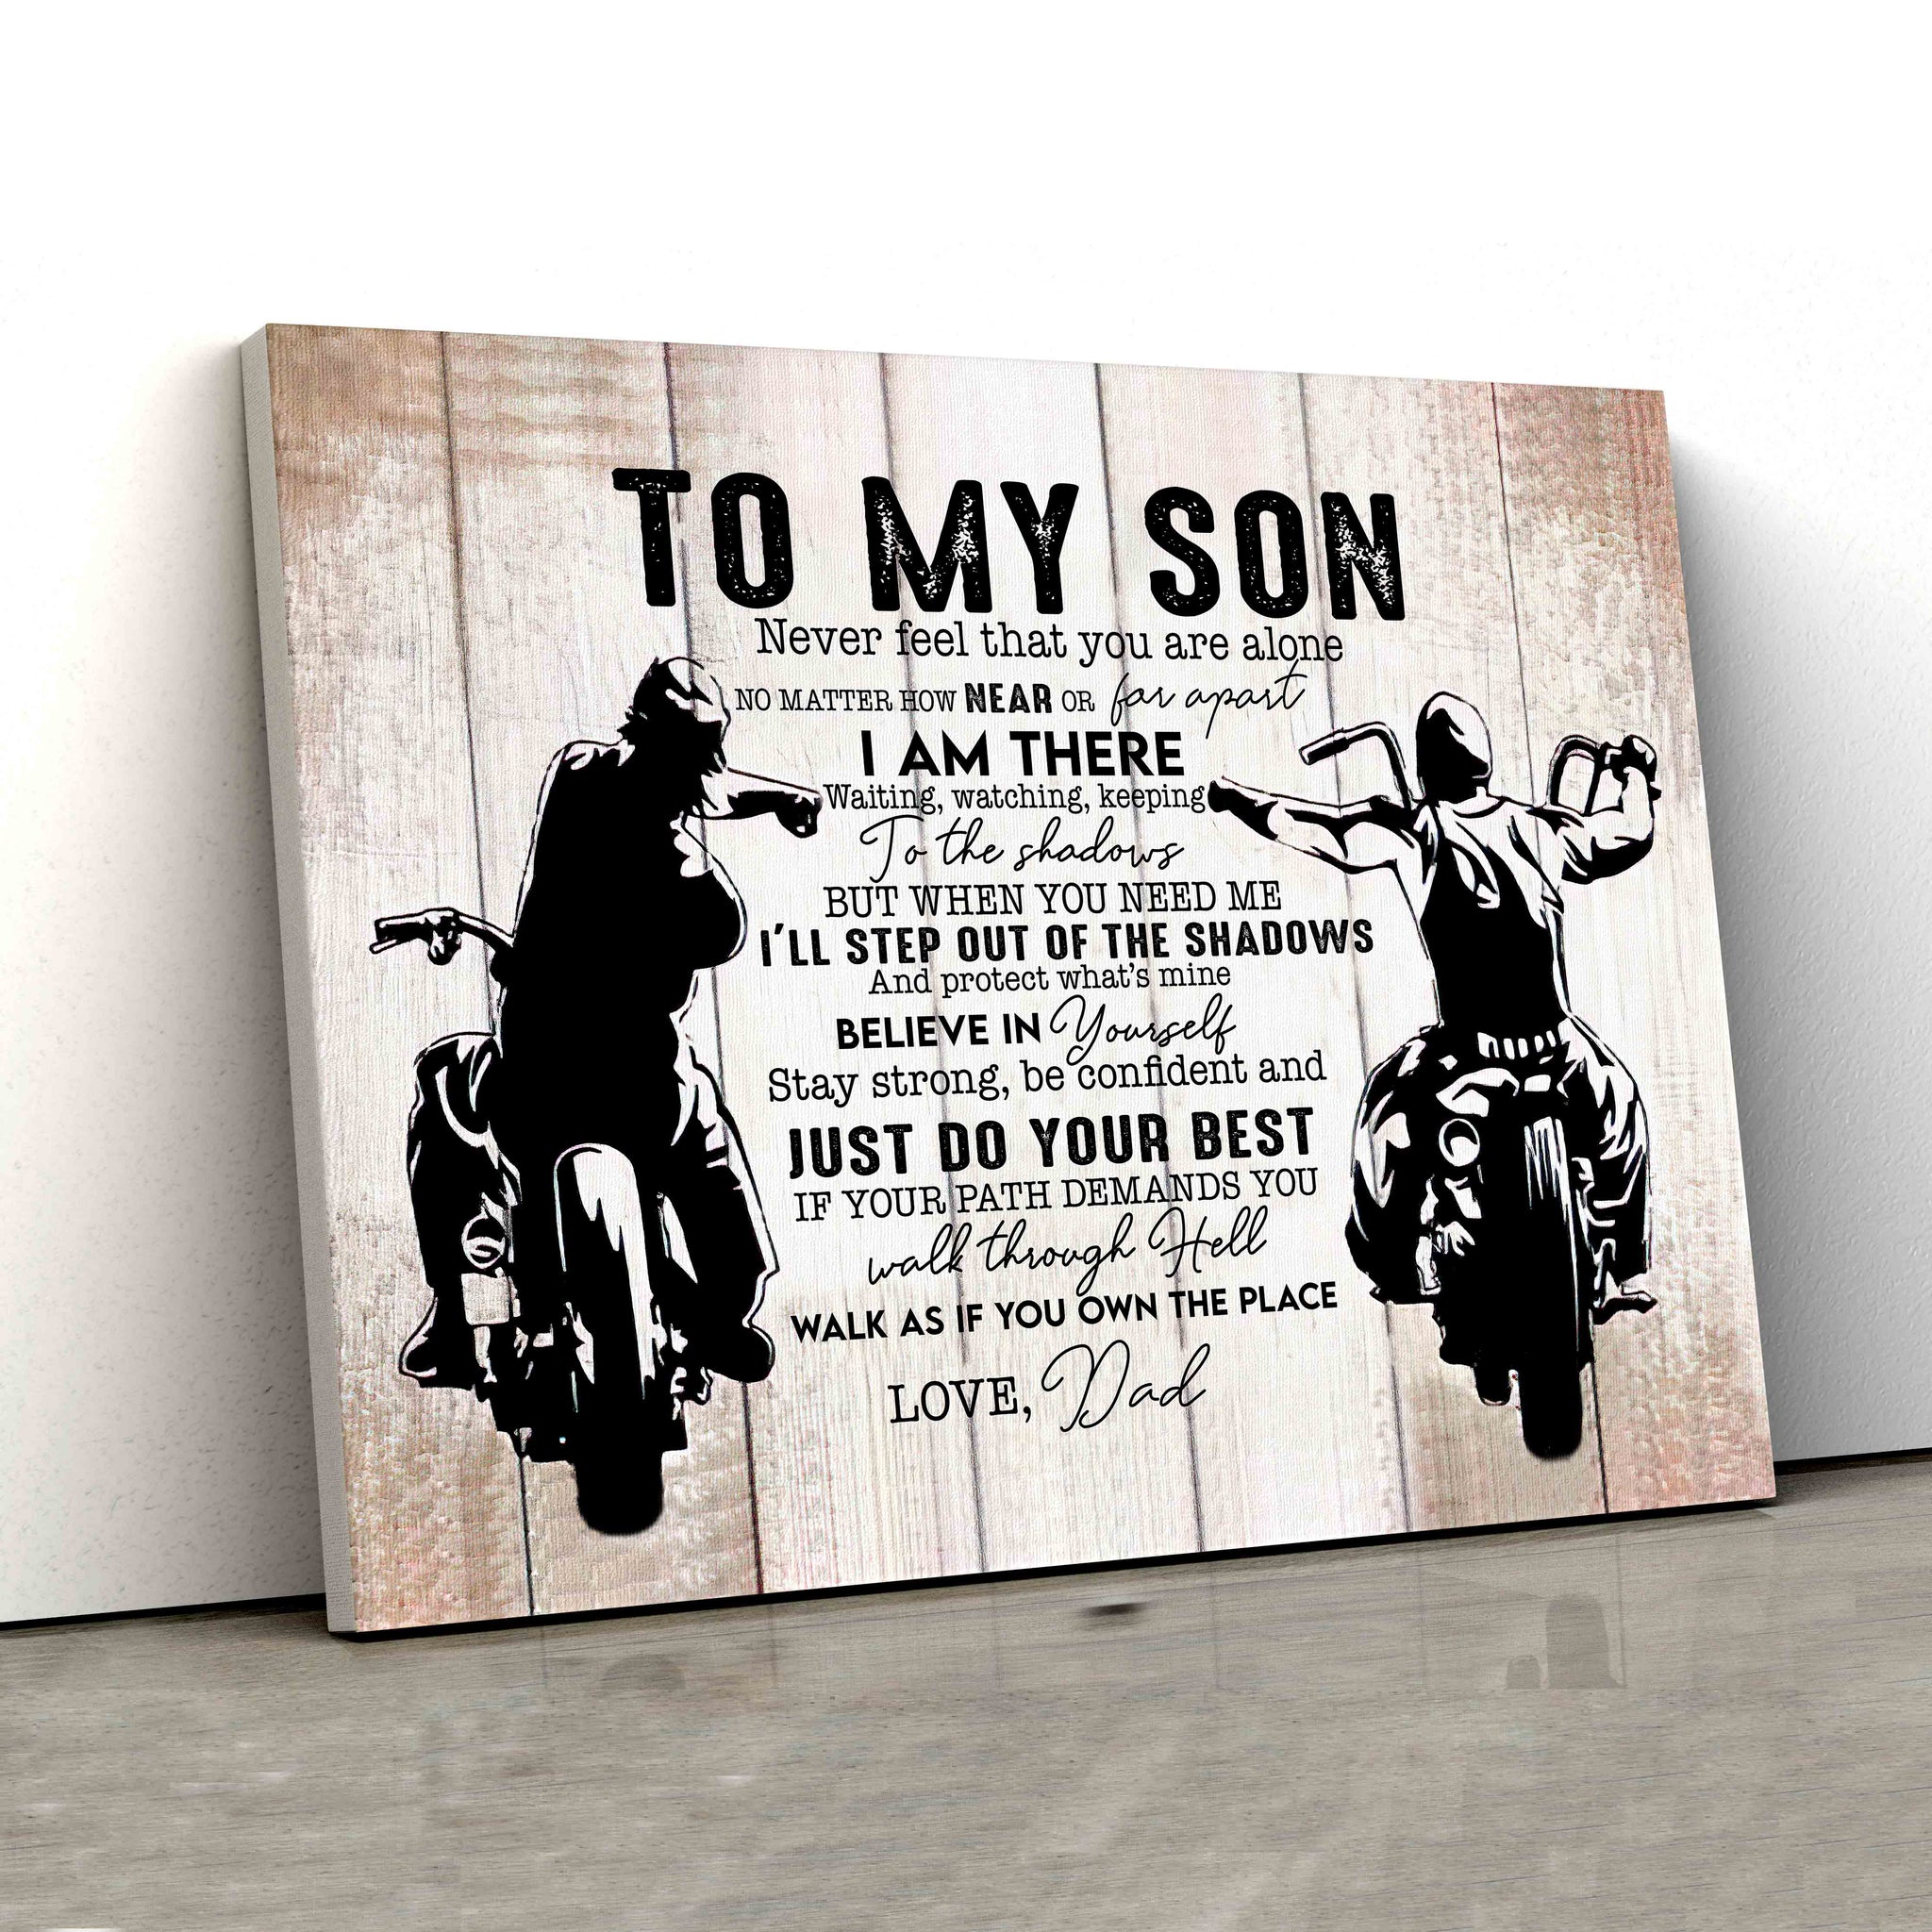 To My Son Canvas, Son Canvas, Dad Canvas, Motorcycle Canvas Art, Family Canvas, Dirt Bike Canvas, Gift Canvas, Custom Name Canvas